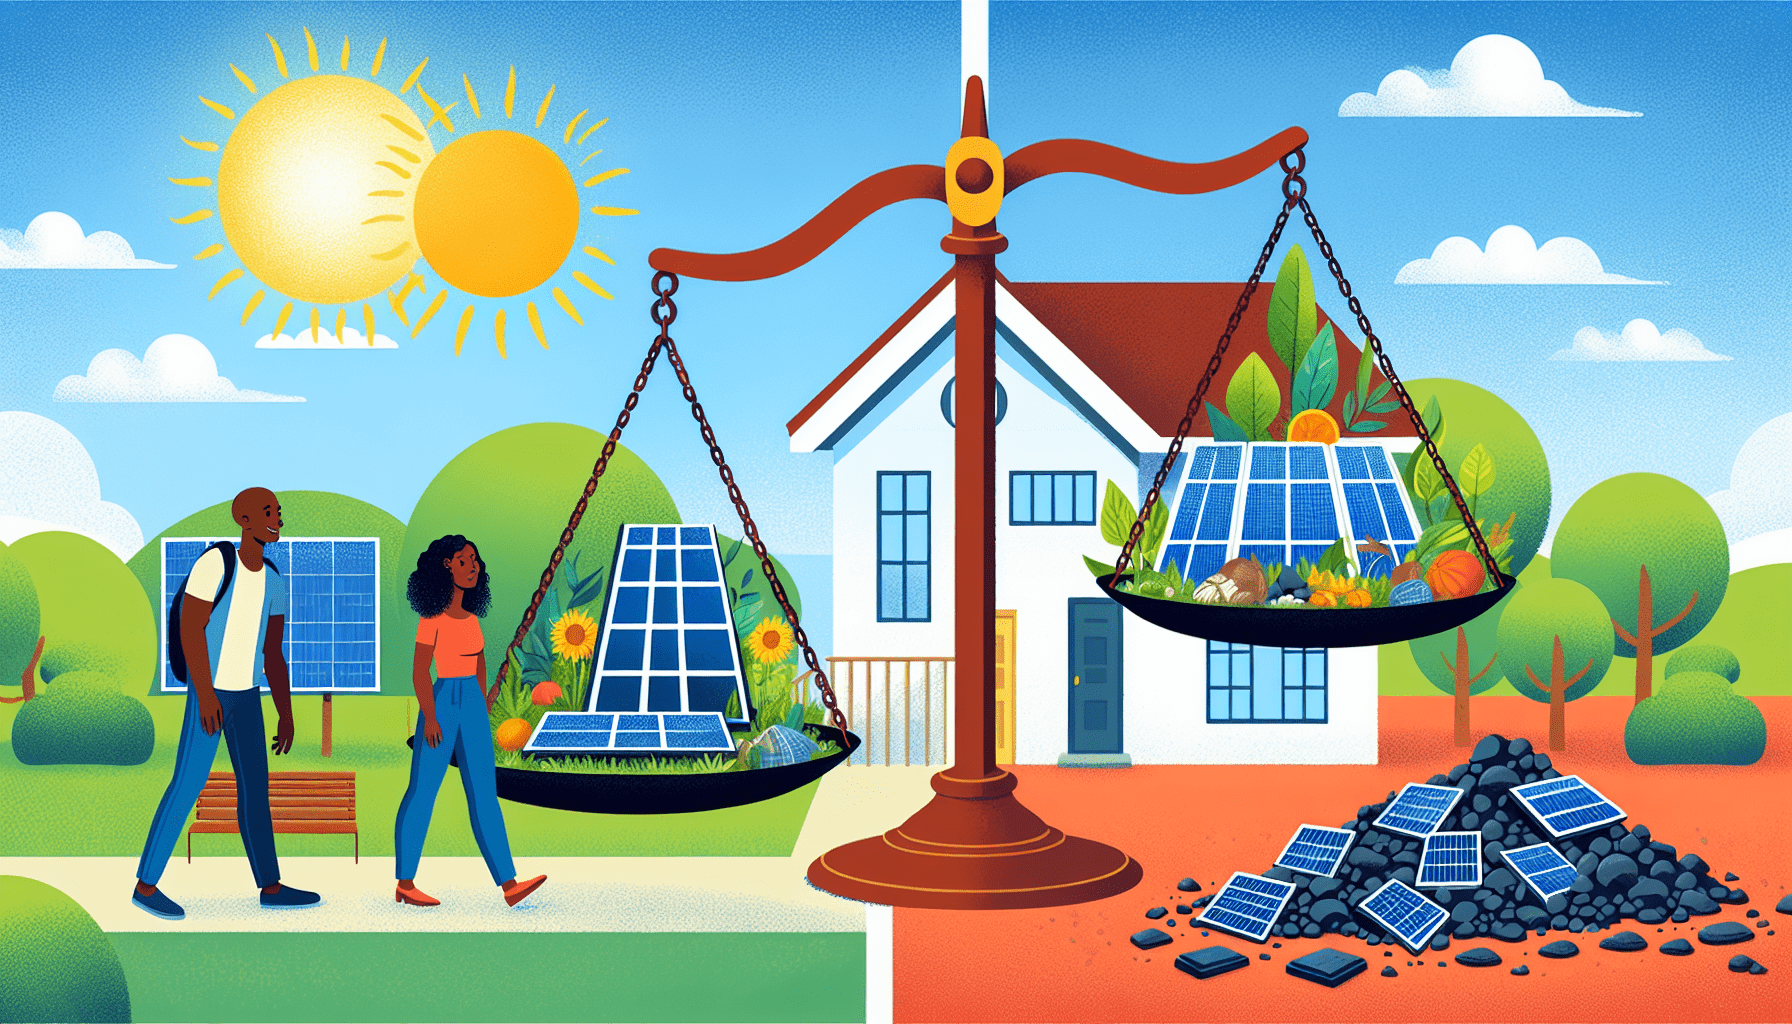 What Are The Environmental Impacts Of Solar Living?